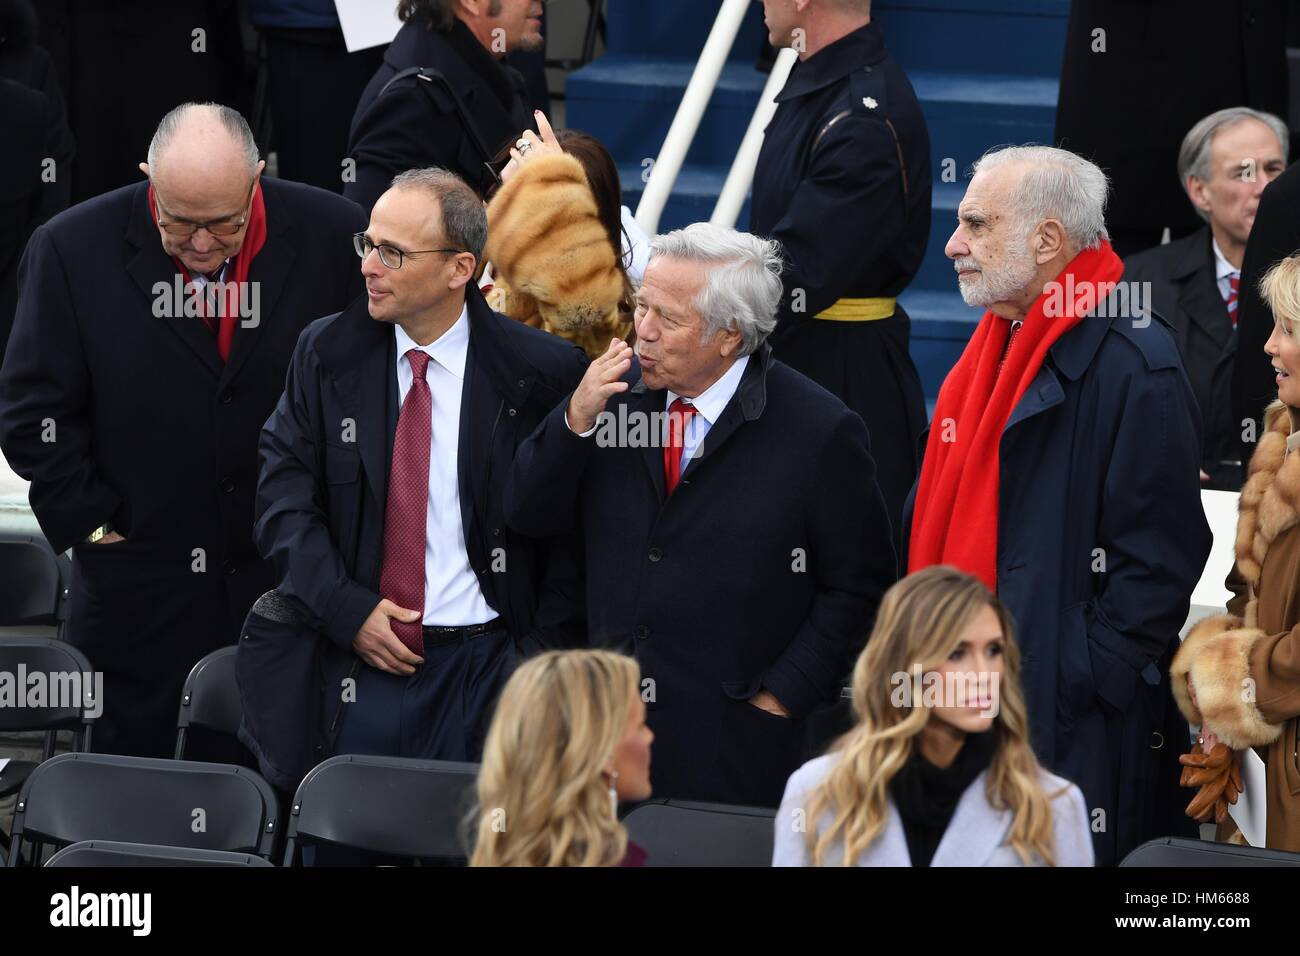 New England Patriots owner Robert Kraft, center, blows a kiss after arriving for the President Inaugural Ceremony on Capitol Hill January 20, 2017 in Washington, DC. Donald Trump became the 45th President of the United States in the ceremony. Standing with Kraft are Rudy Giuliani, left, son Patrick Kraft and Billionaire Carl Icahn, right. Stock Photo